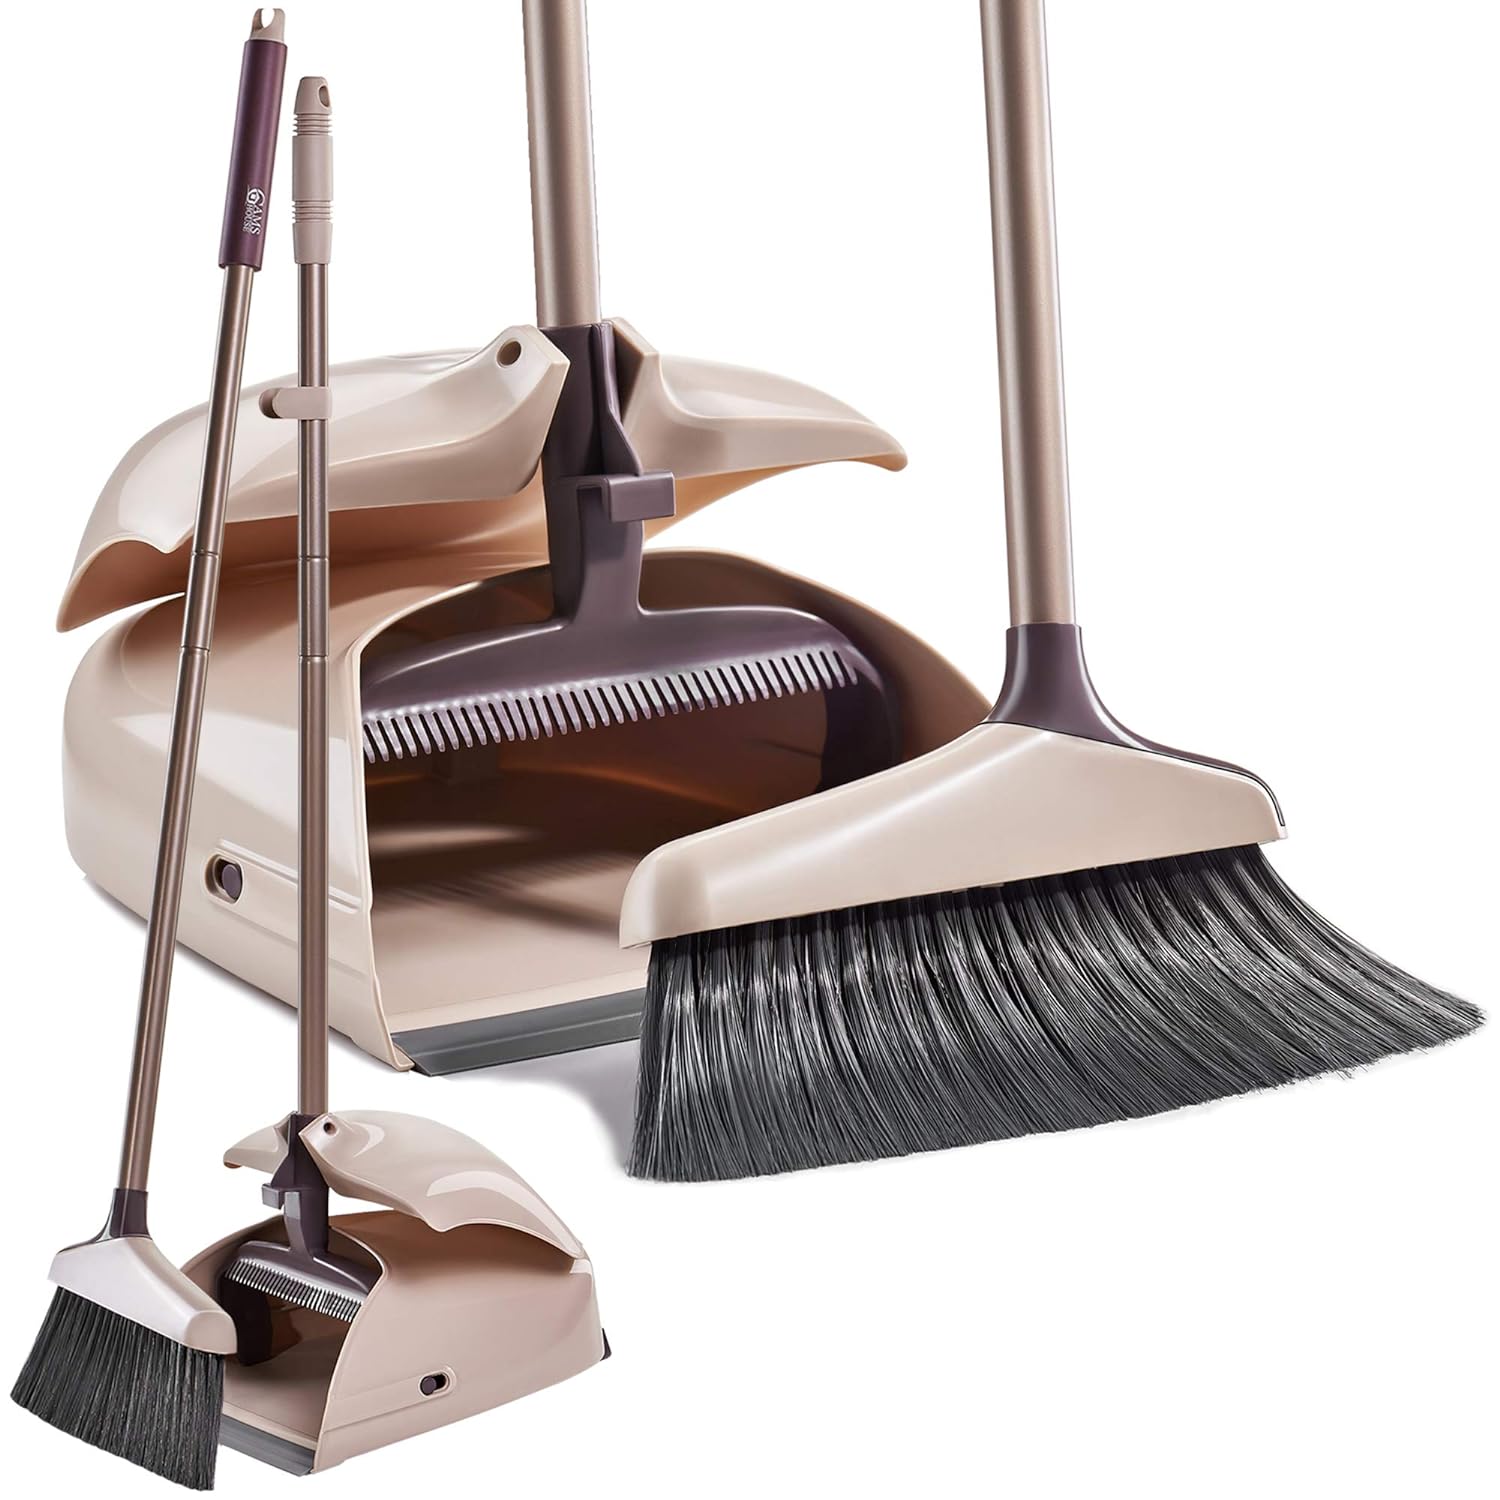 A broom and dustpan.